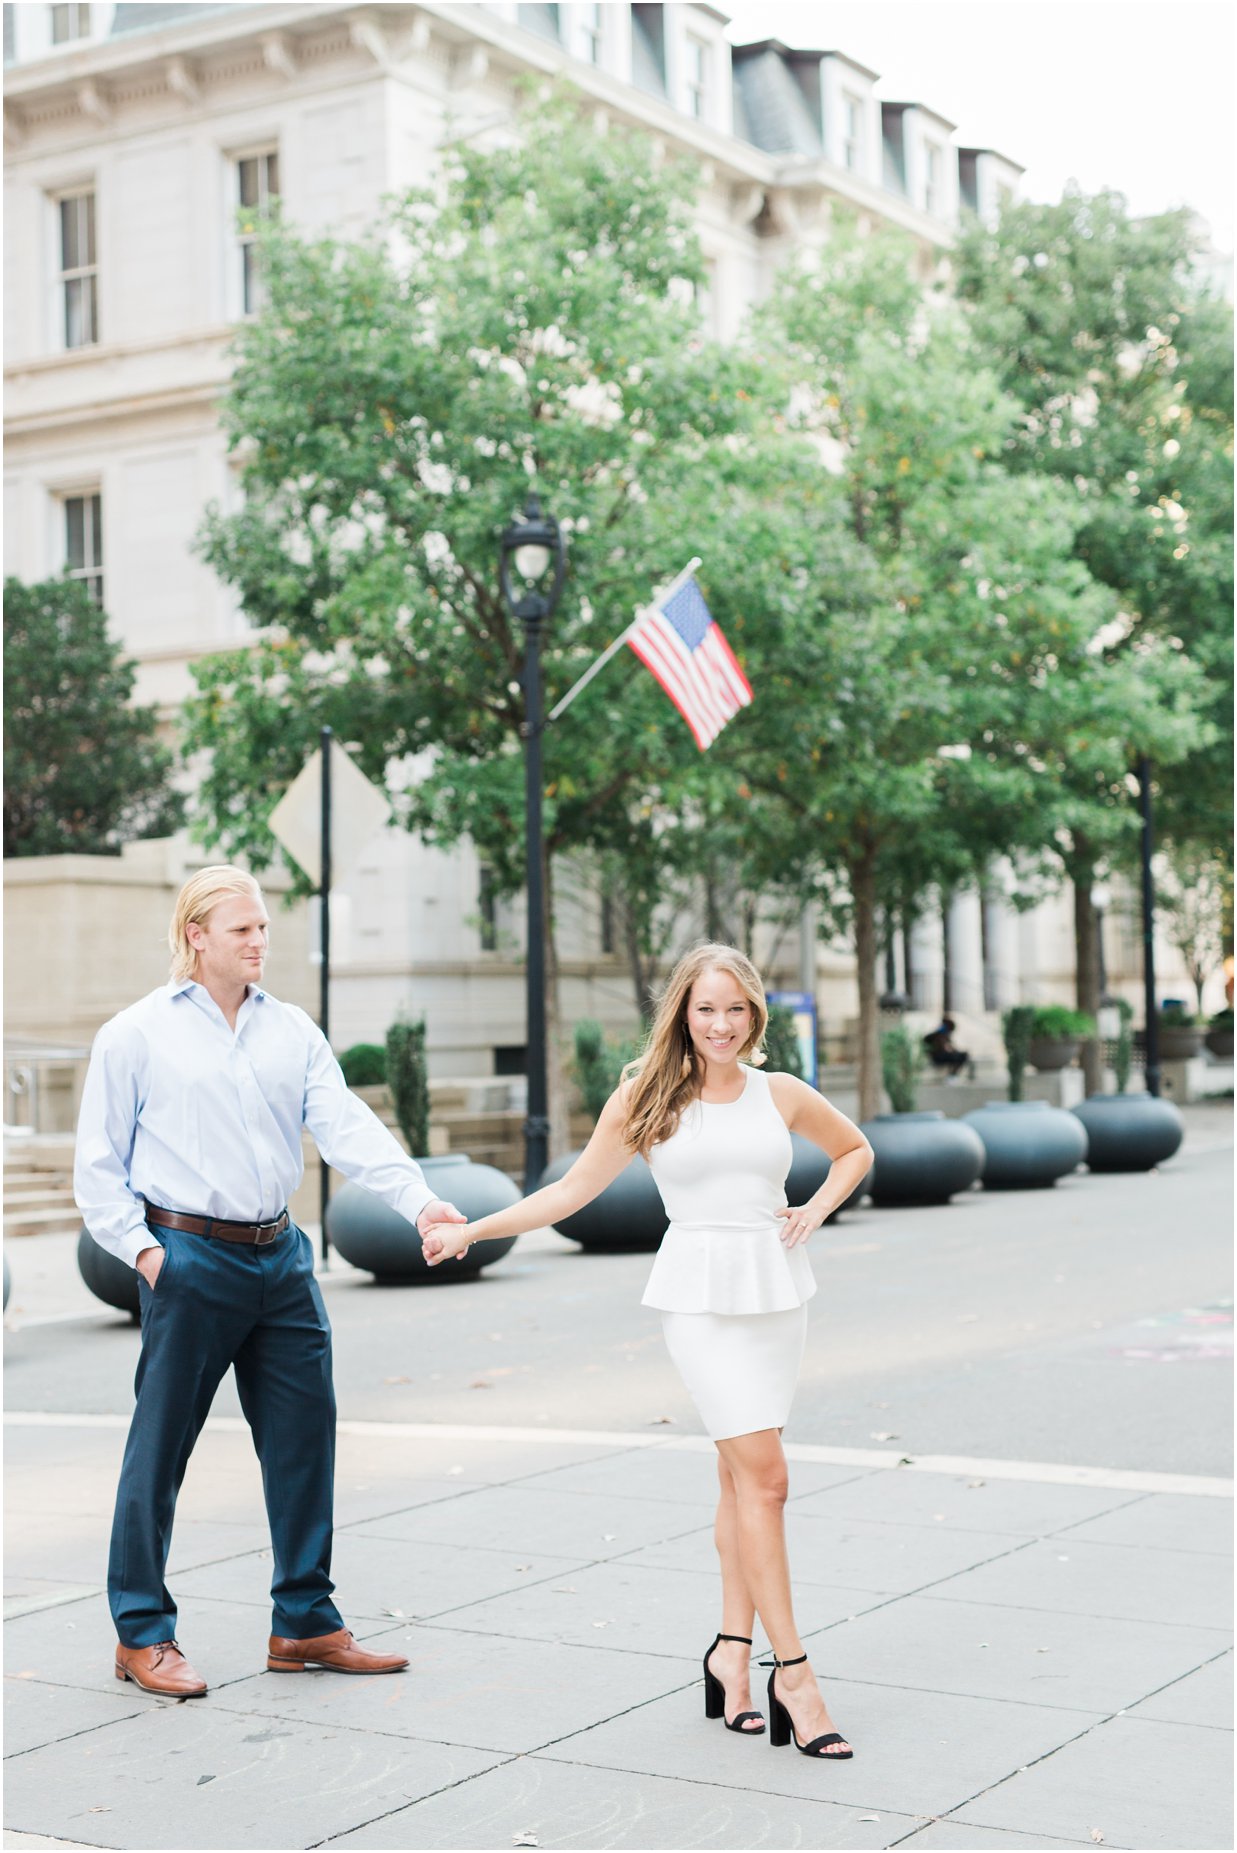 Downtown Raleigh lifestyle photography